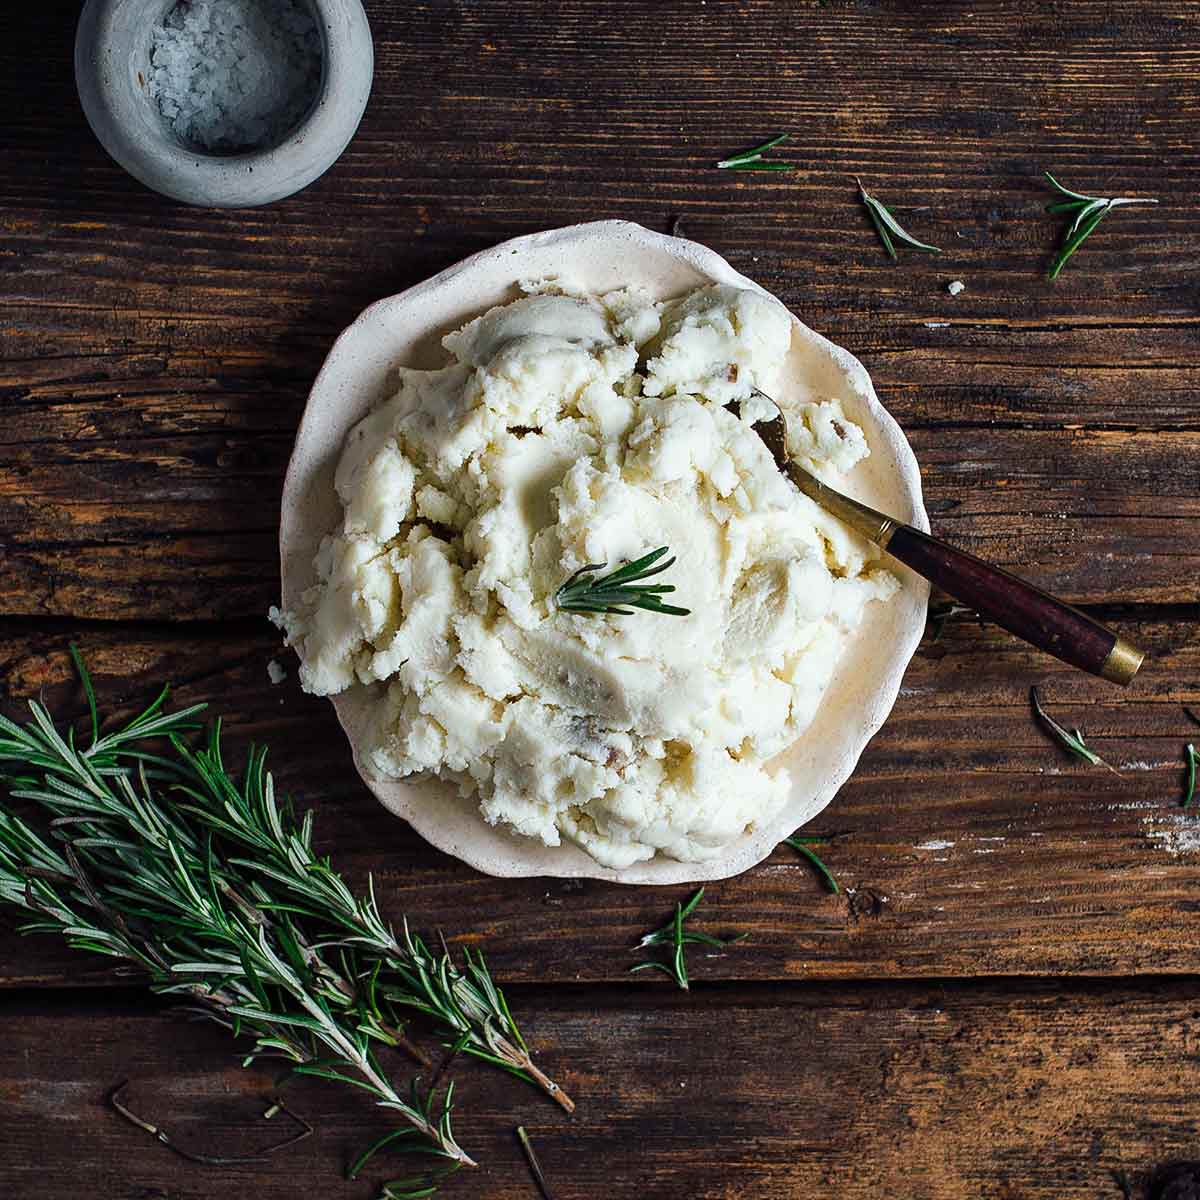 A bowl of vegan mashed potatoes garnished with a sprig of rosemary with a spoon resting inside and more rosemary on the side.